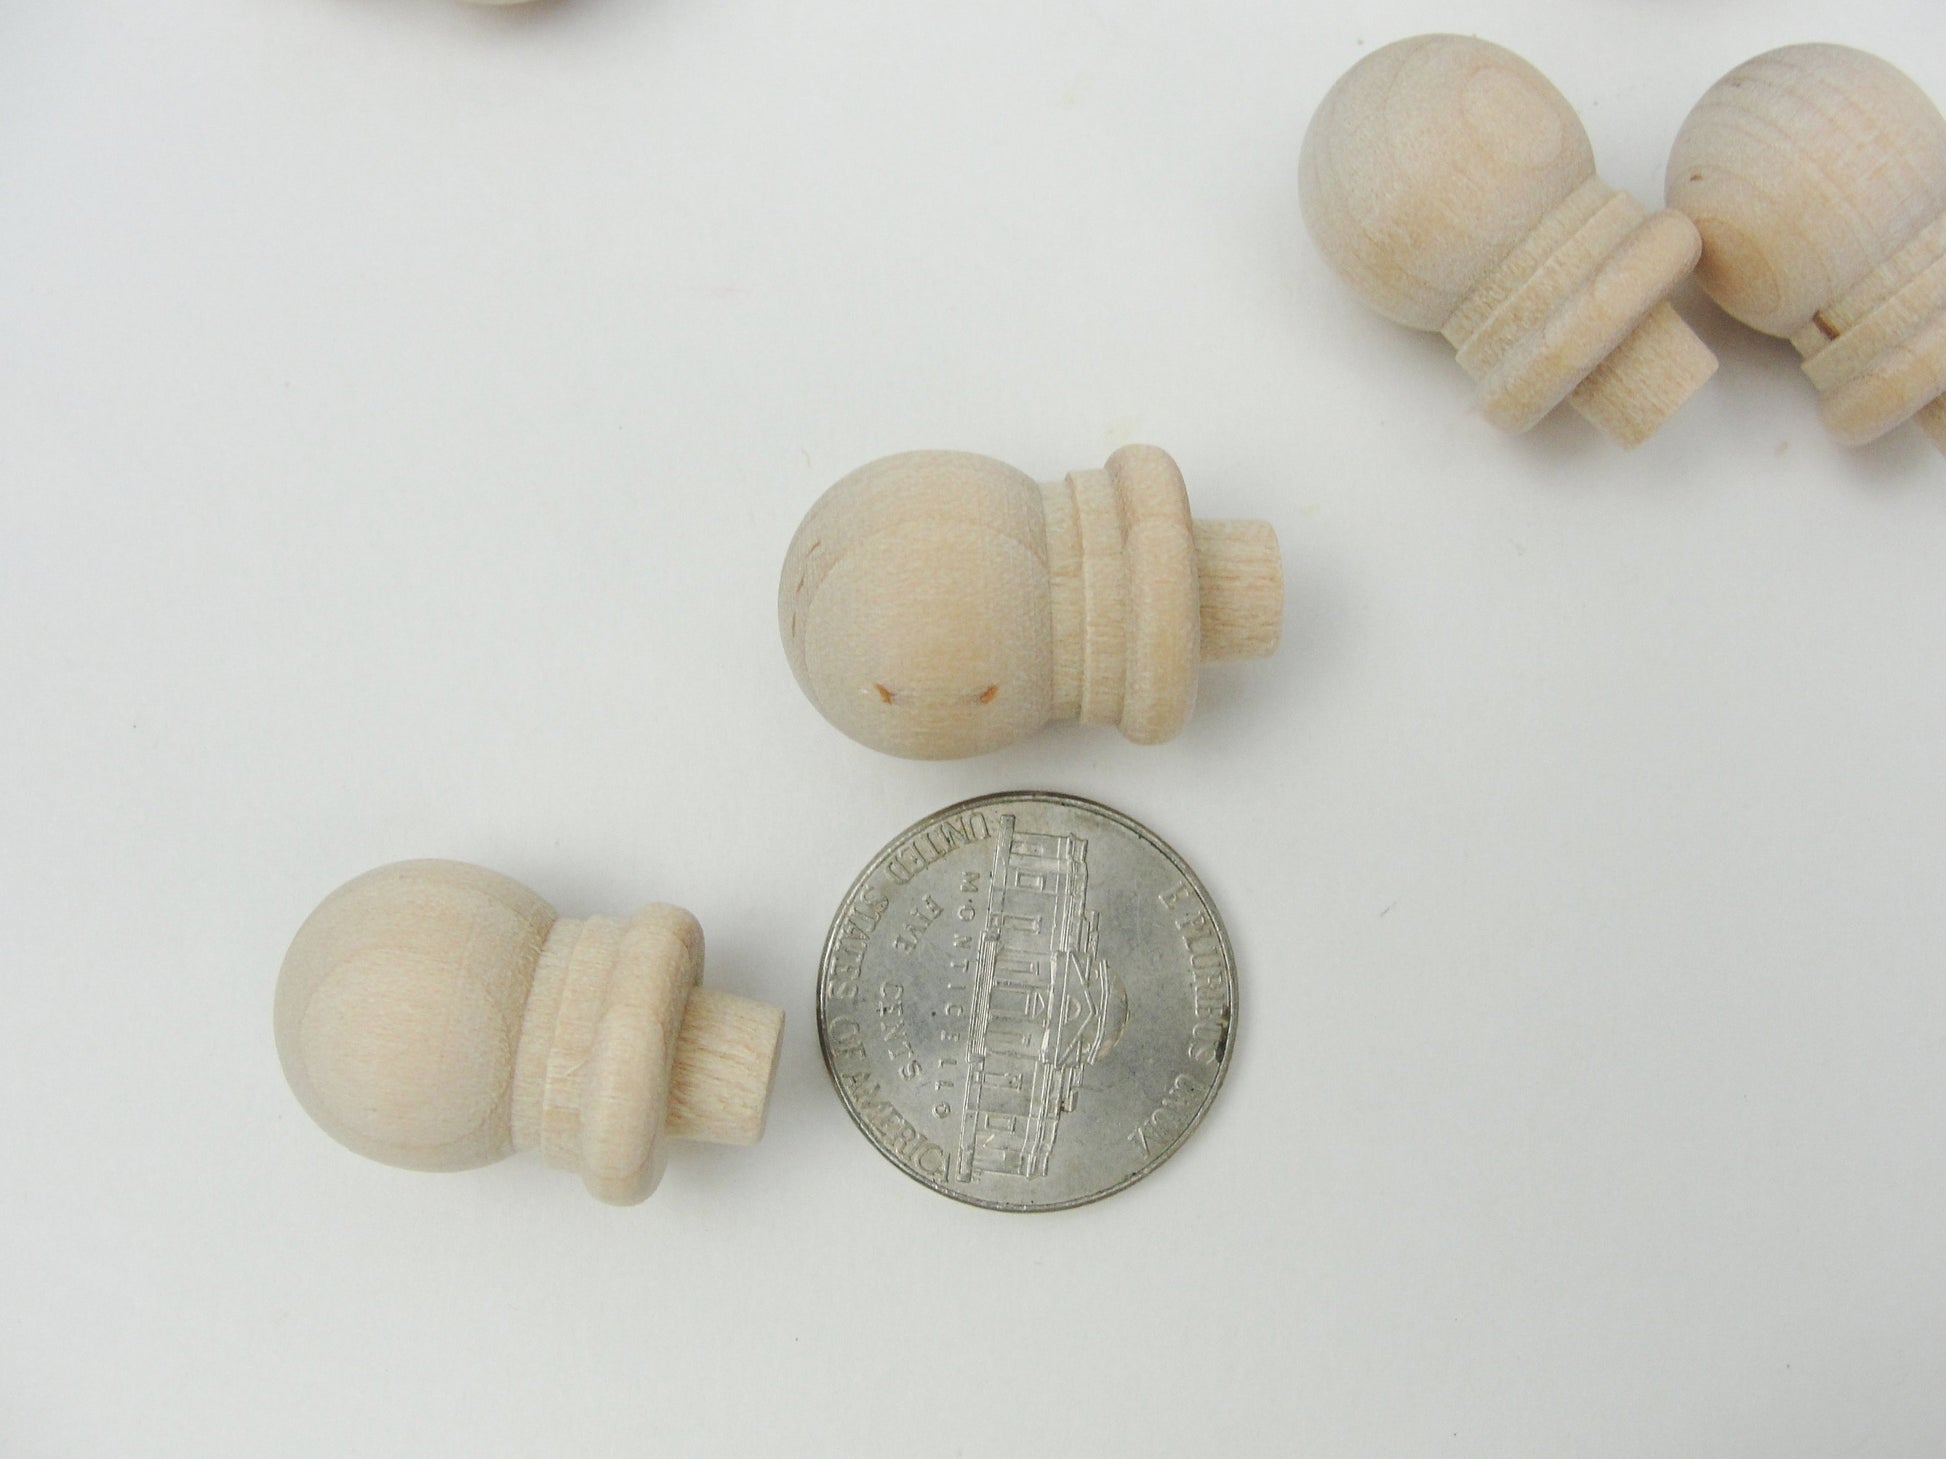 Tiny ball finial set of 6 - Wood parts - Craft Supply House